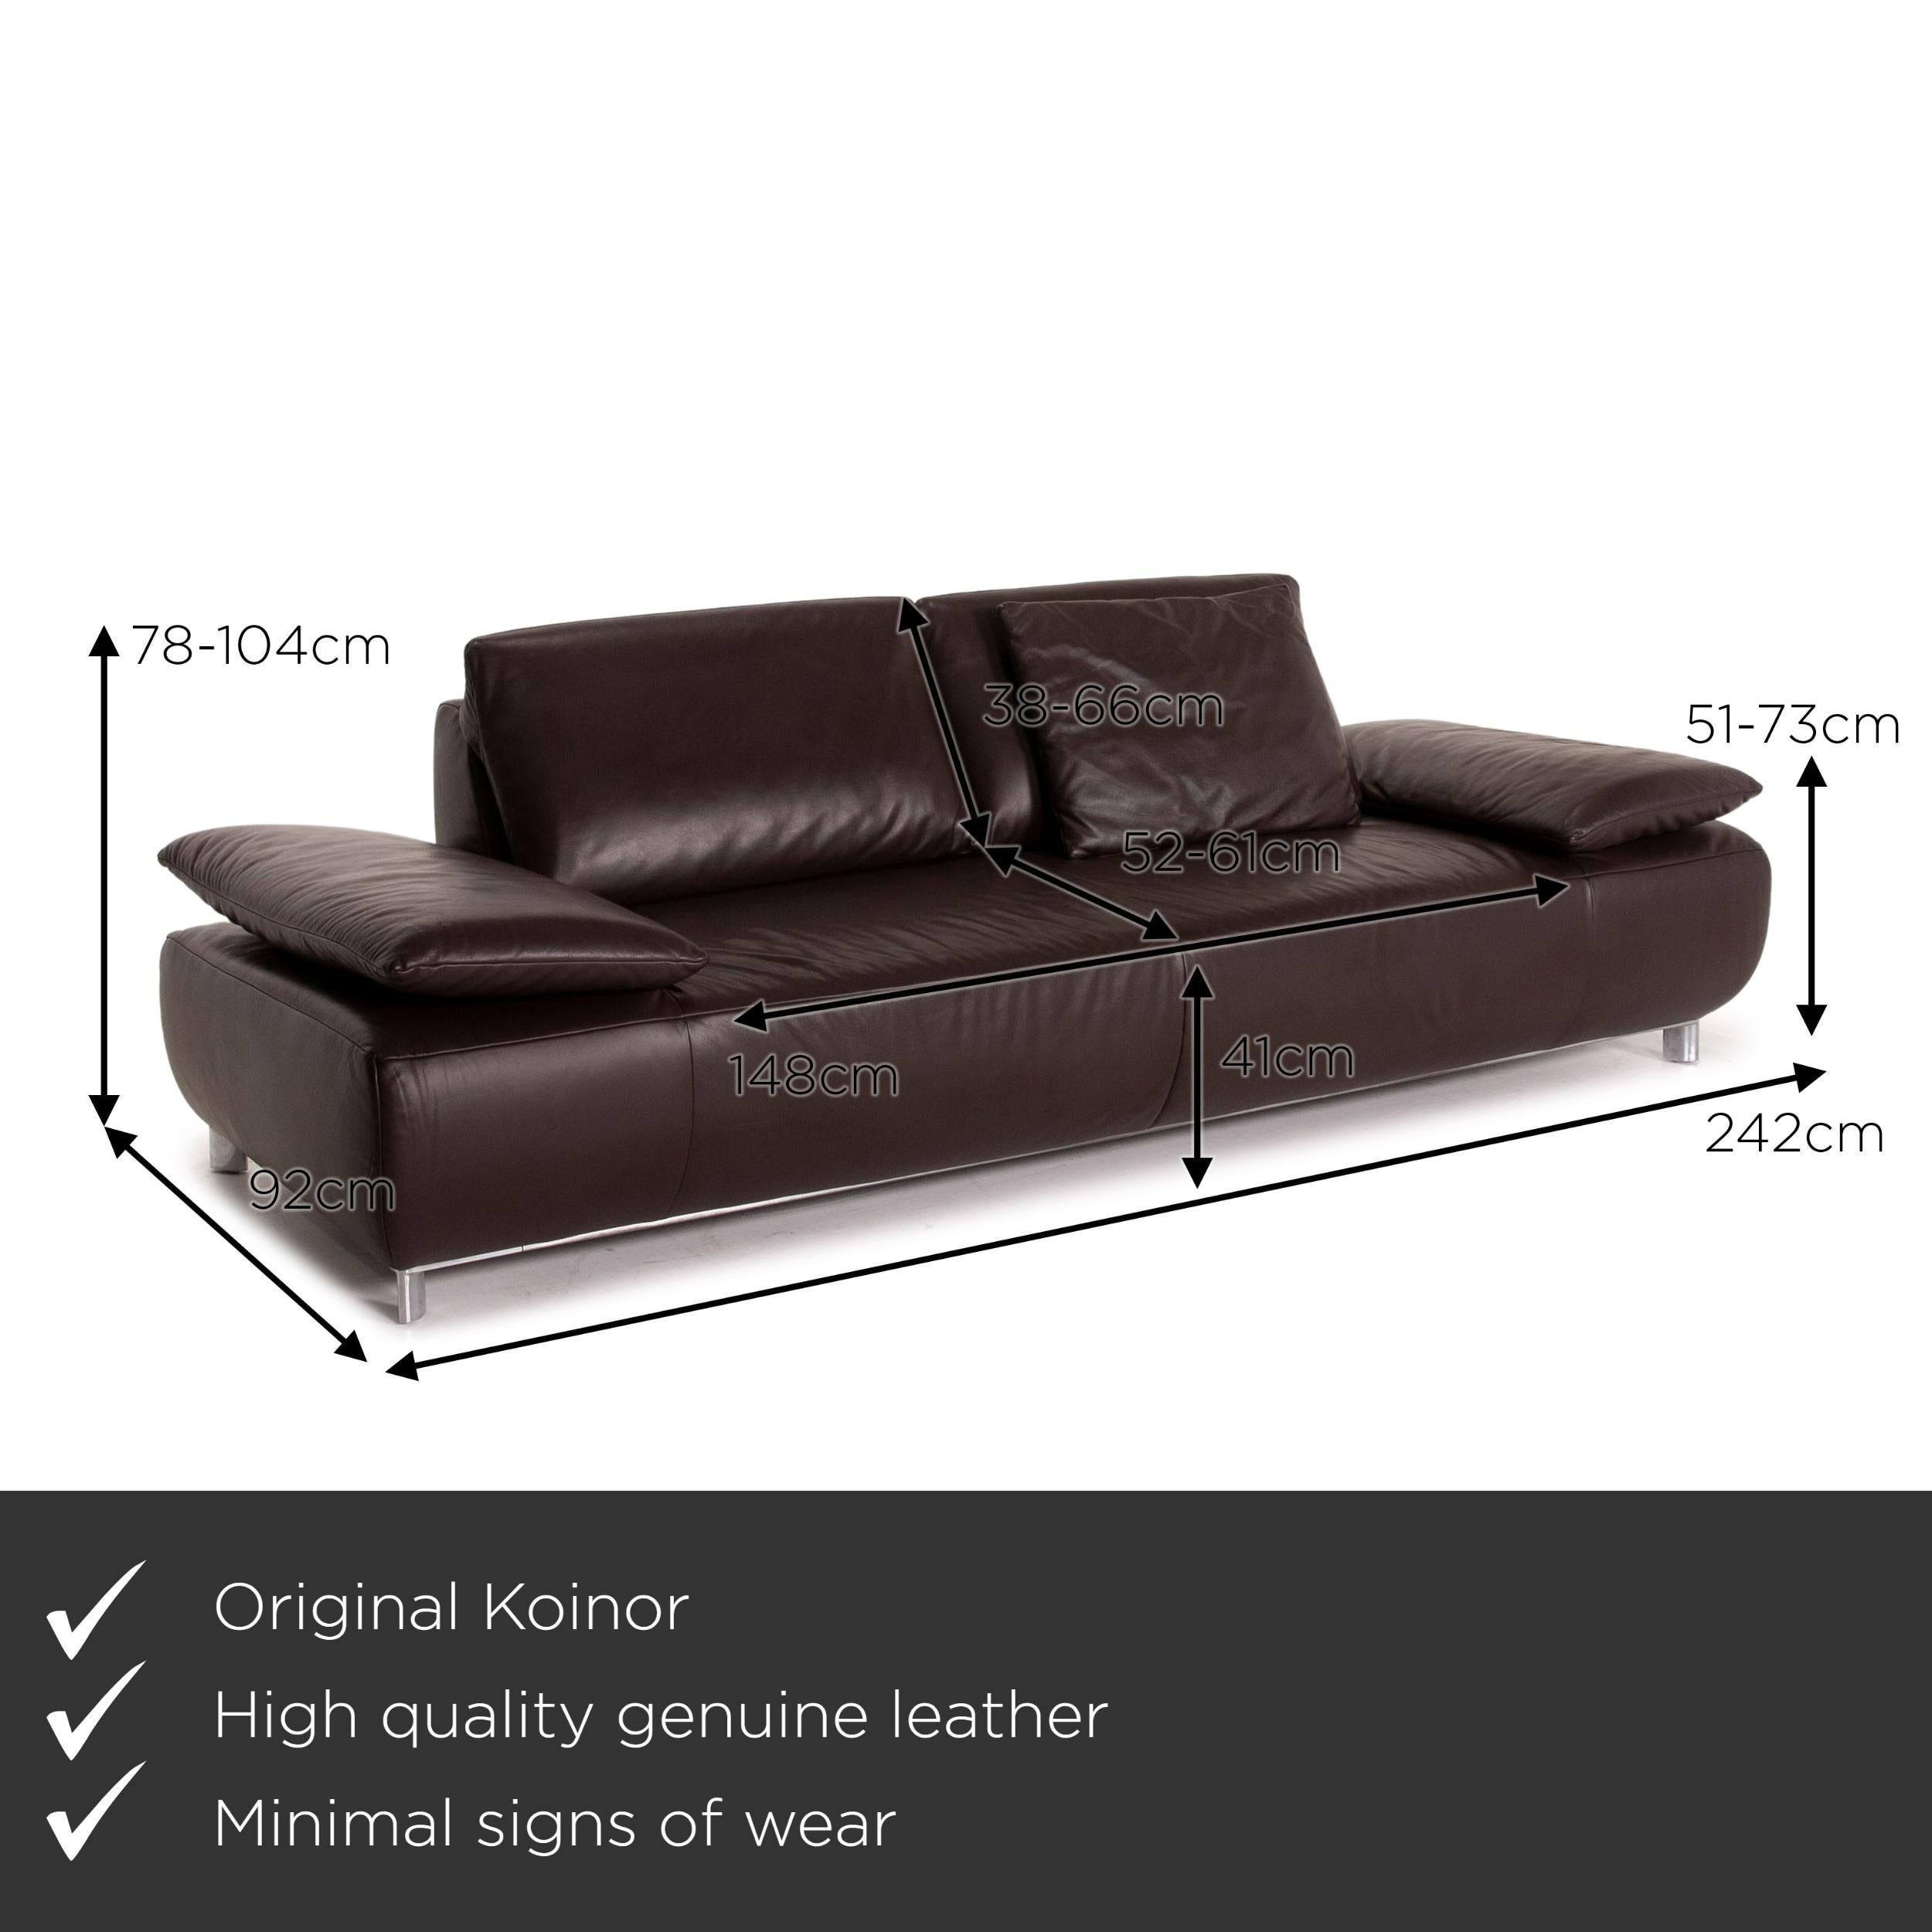 We present to you a Koinor Volare leather sofa brown dark brown three-seat function couch.
 

 Product measurements in centimeters:
 

Depth 92
Width 242
Height 78
Seat height 41
Rest height 51
Seat depth 52
Seat width 148
Back height